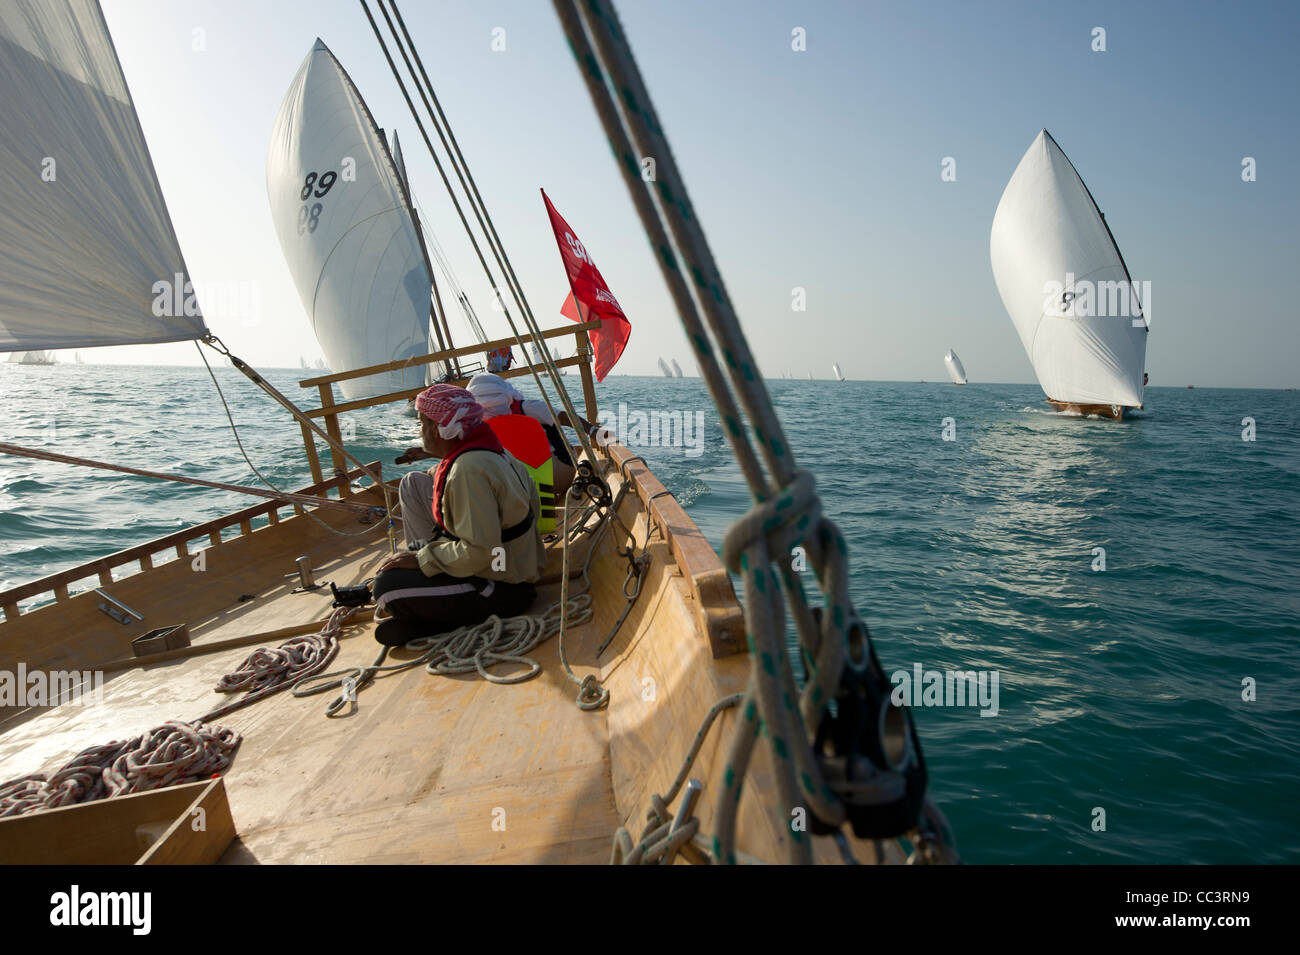 On board a traditional sailing Dhow during a race Stock Photo